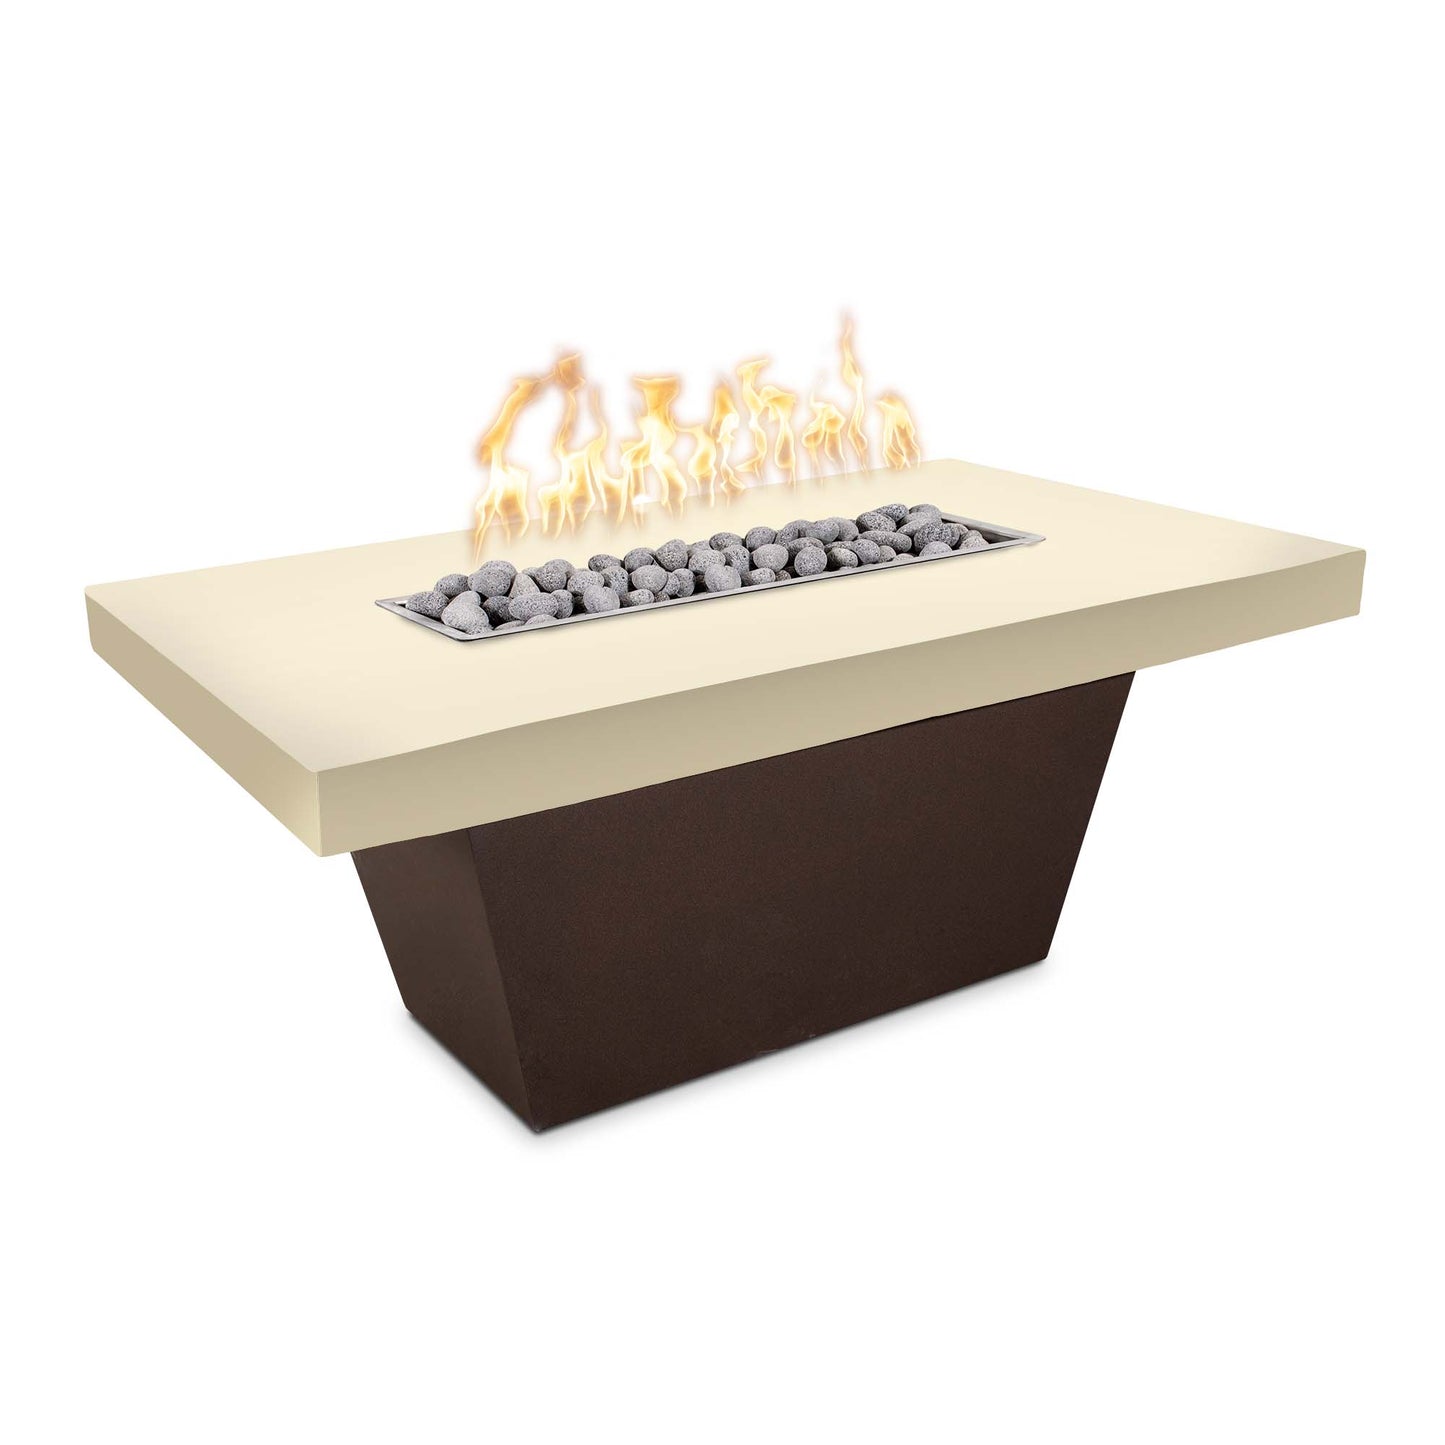 The Outdoor Plus Tacoma 48" Natural Gray Concrete Top & White Powder Coated Base Liquid Propane Fire Table with Match Lit Ignition